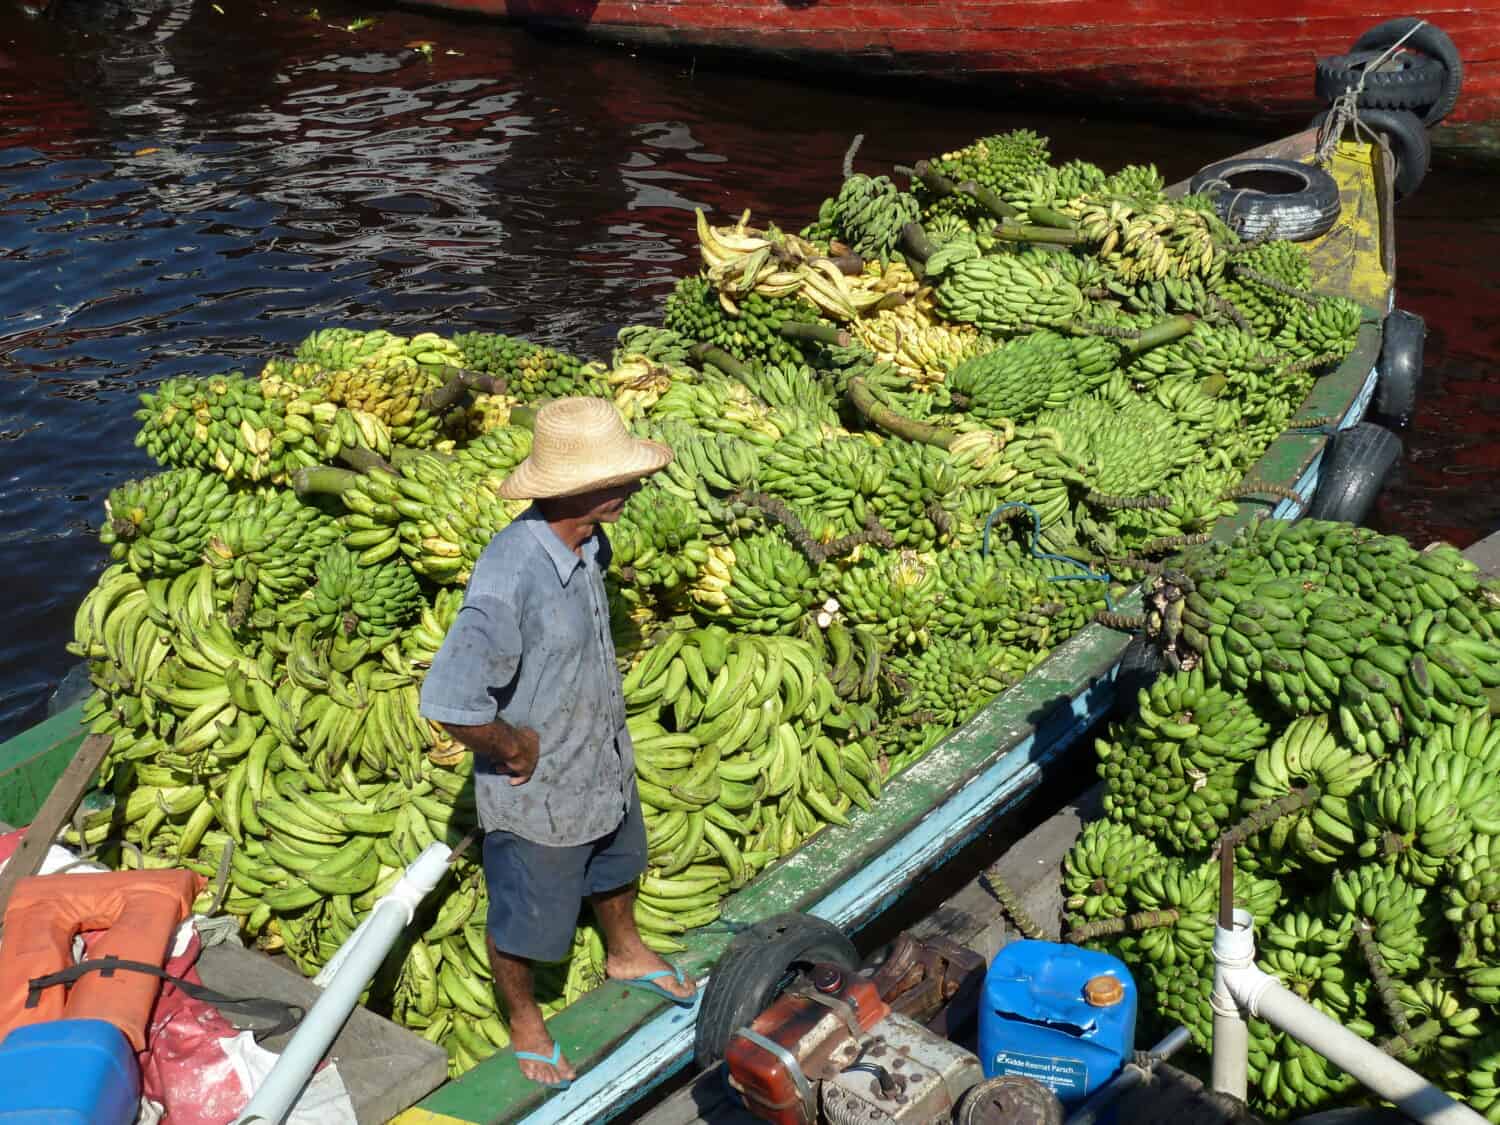 Bananas (Musa) delivery by boat to the banana market in Manaus, Amazonas - Brazil